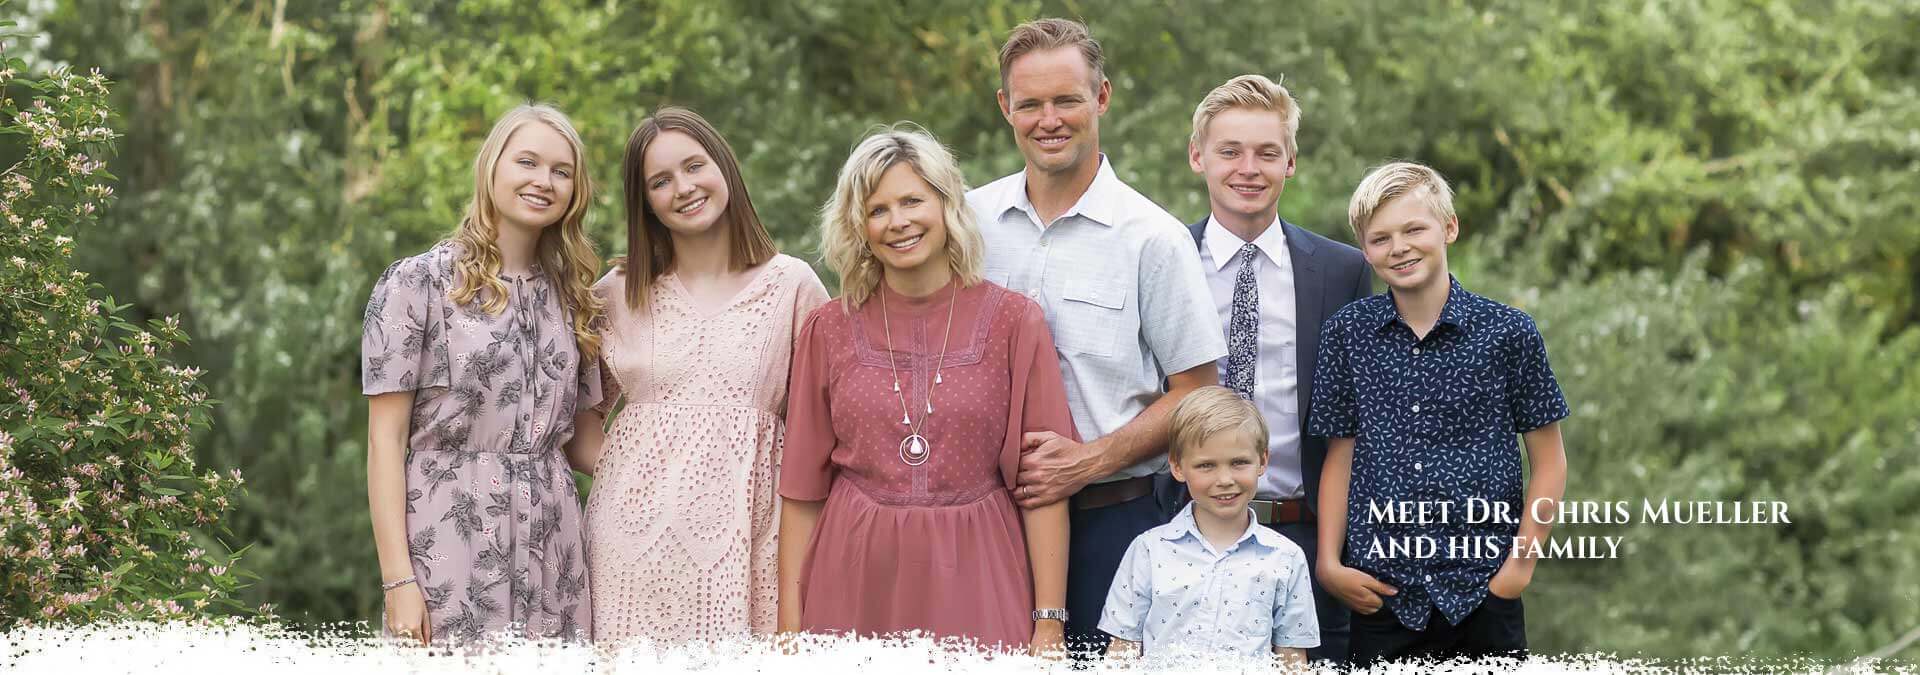 Dr.Chris Mueller and his family